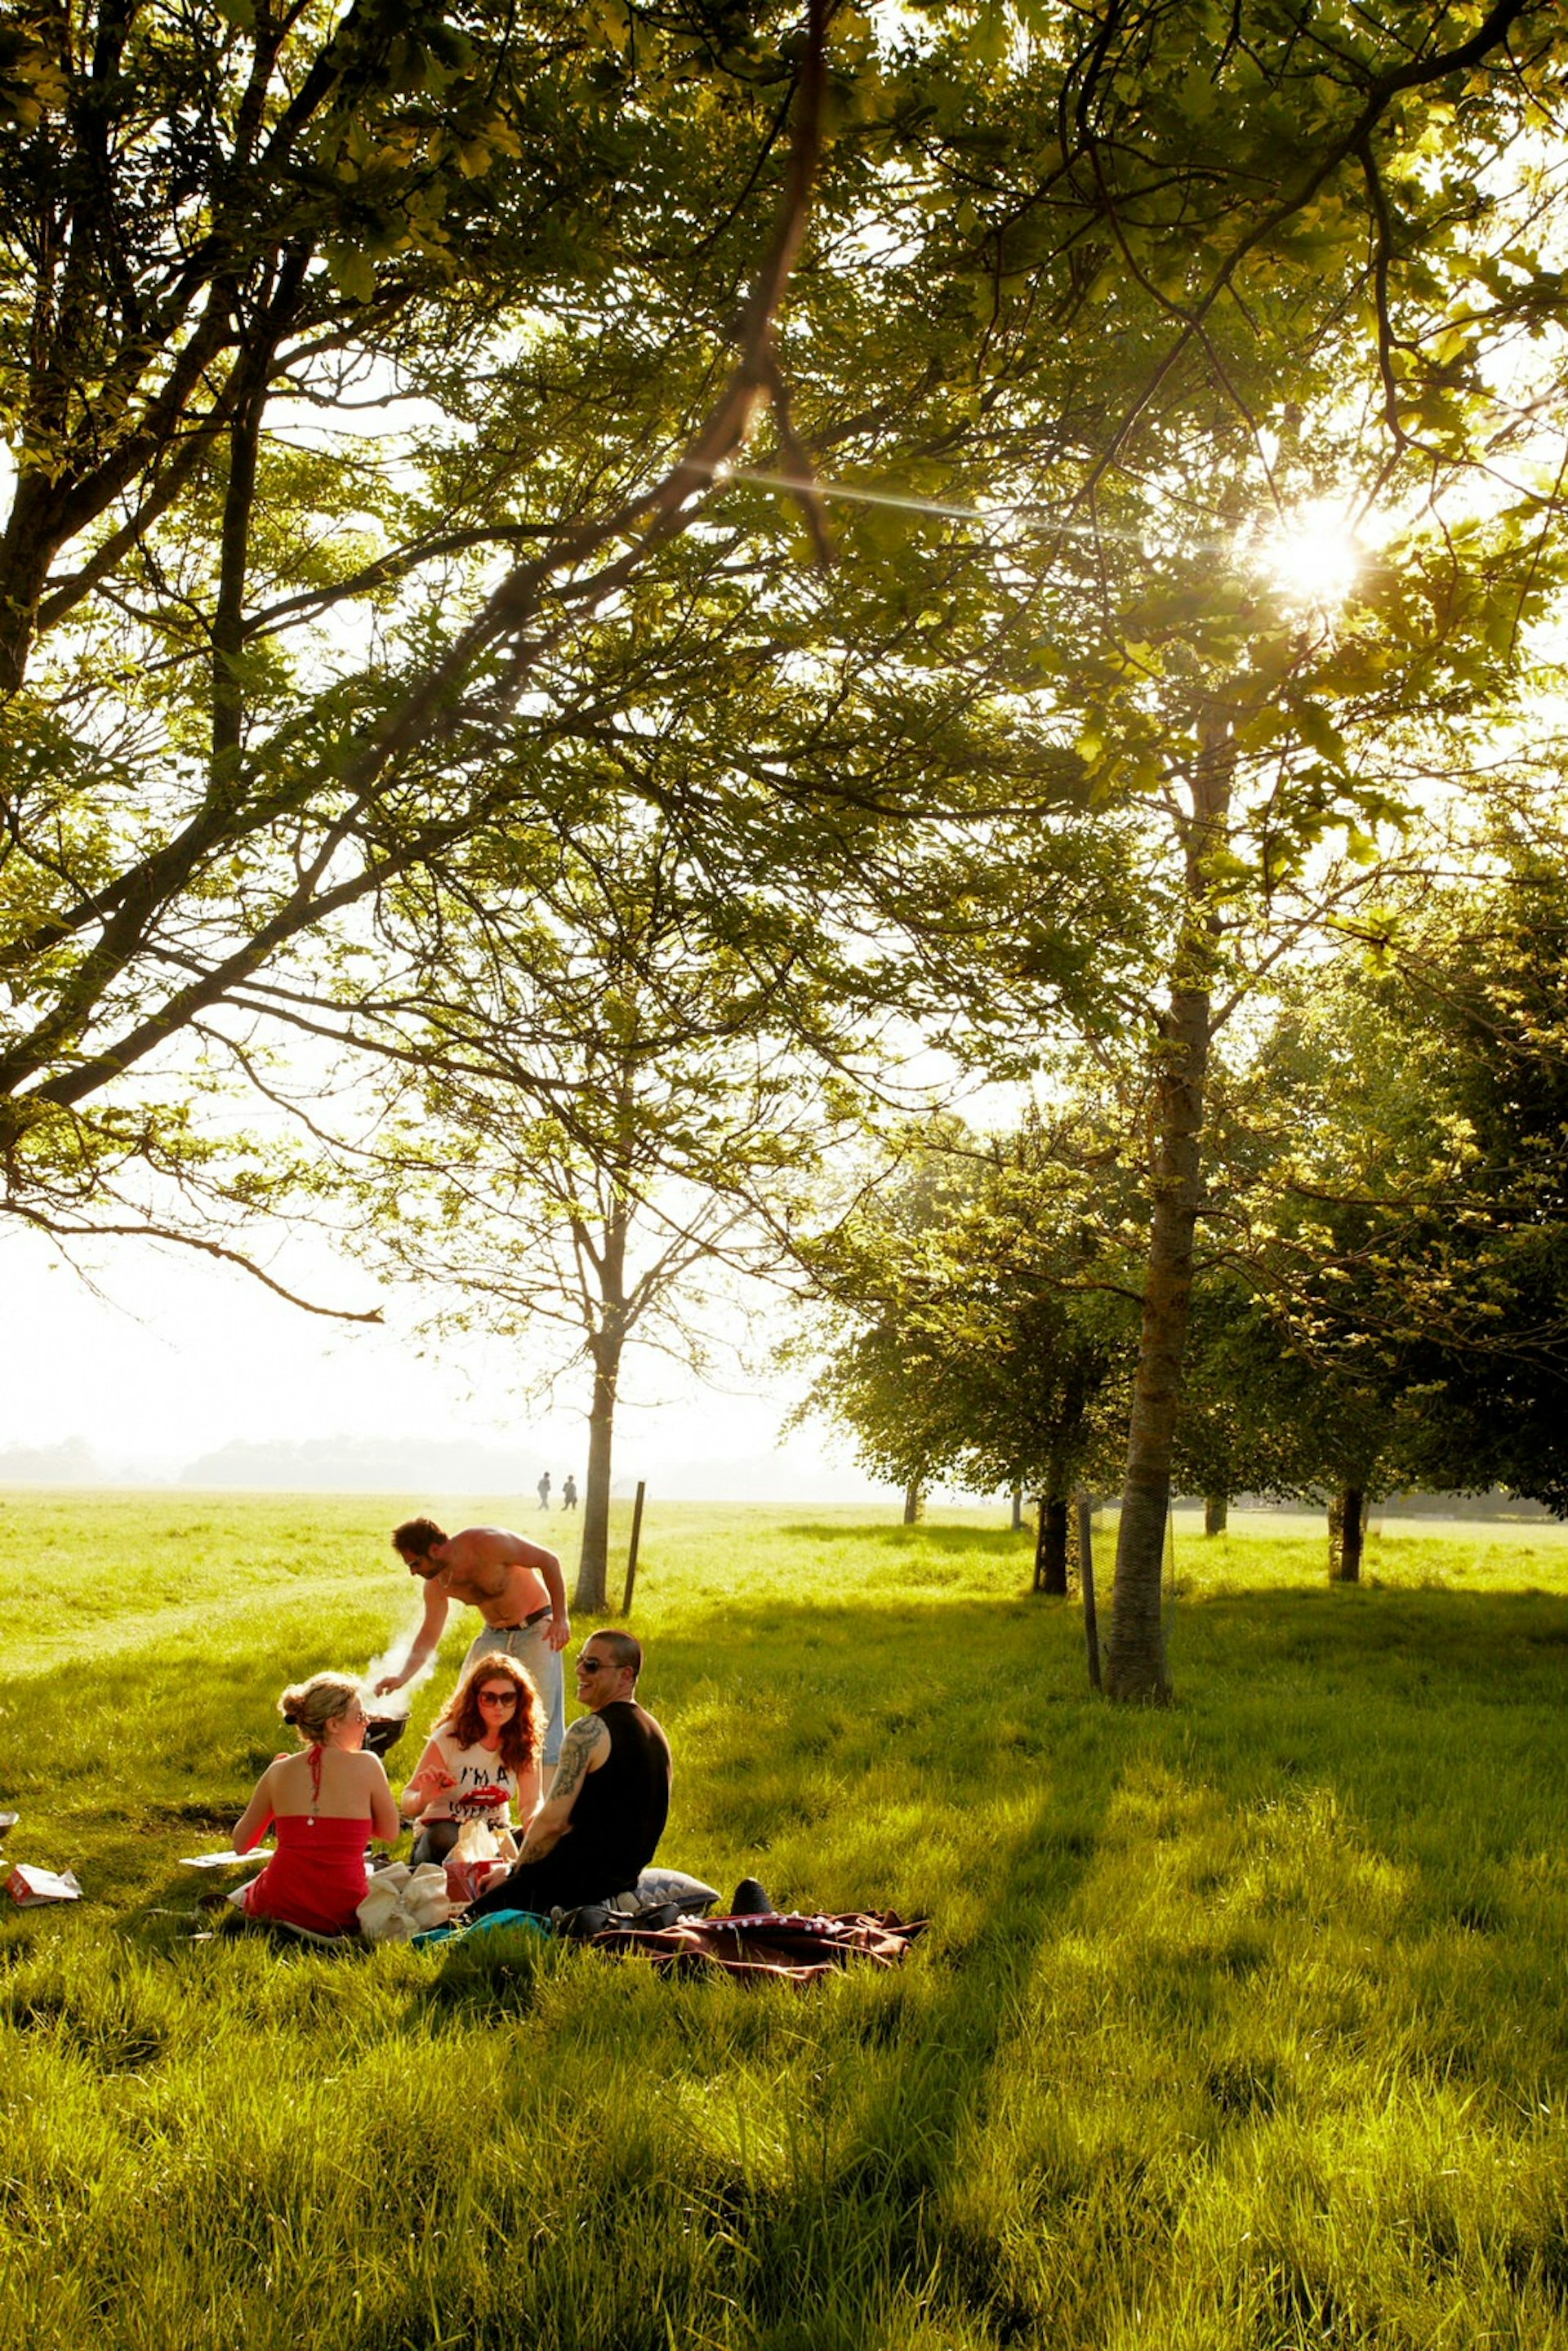 A group of friends has a picnic under the trees in Phoenix Park